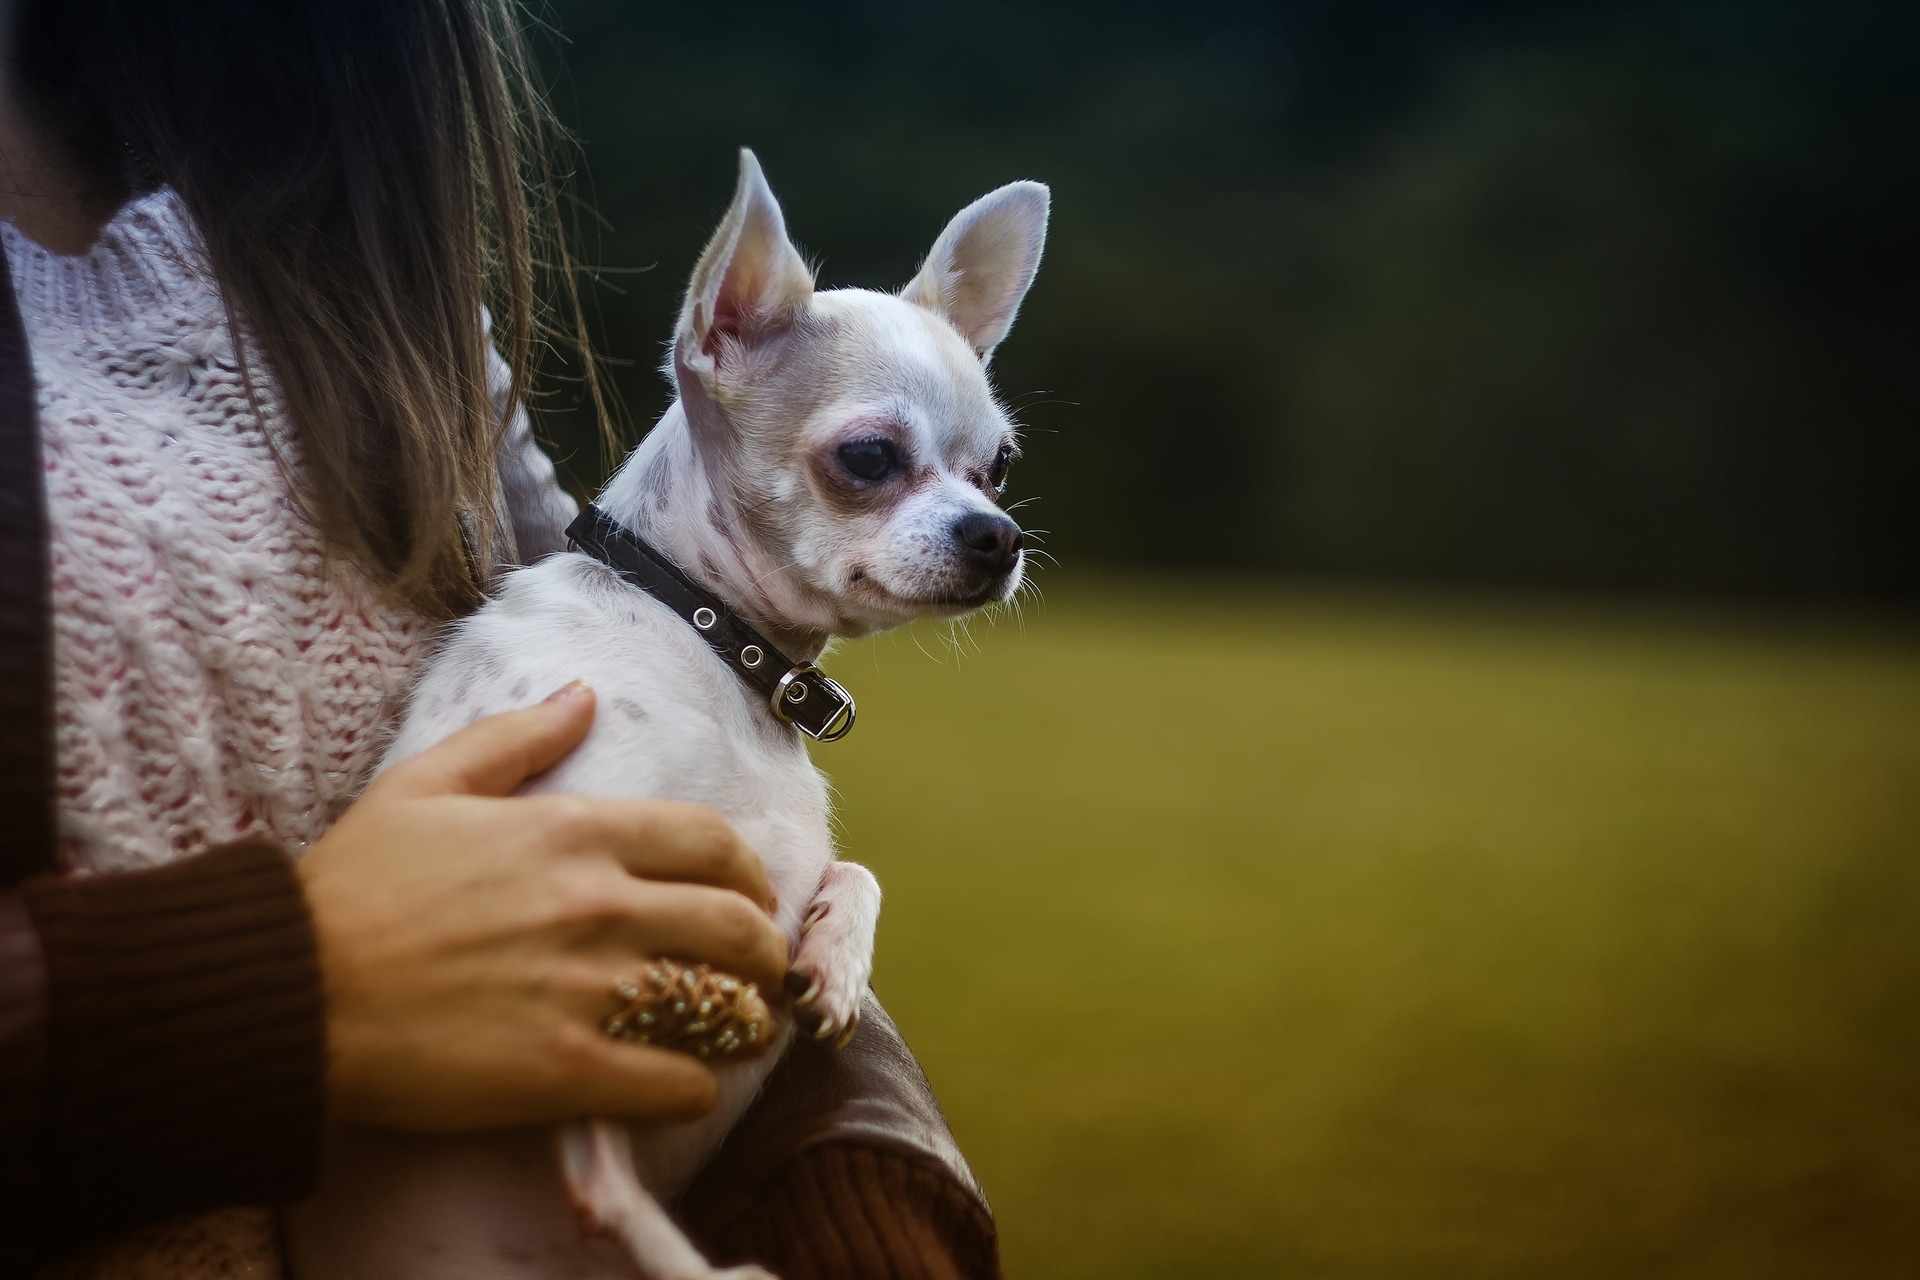 woman in white and brown knitted top carrying white smooth Chihuahua